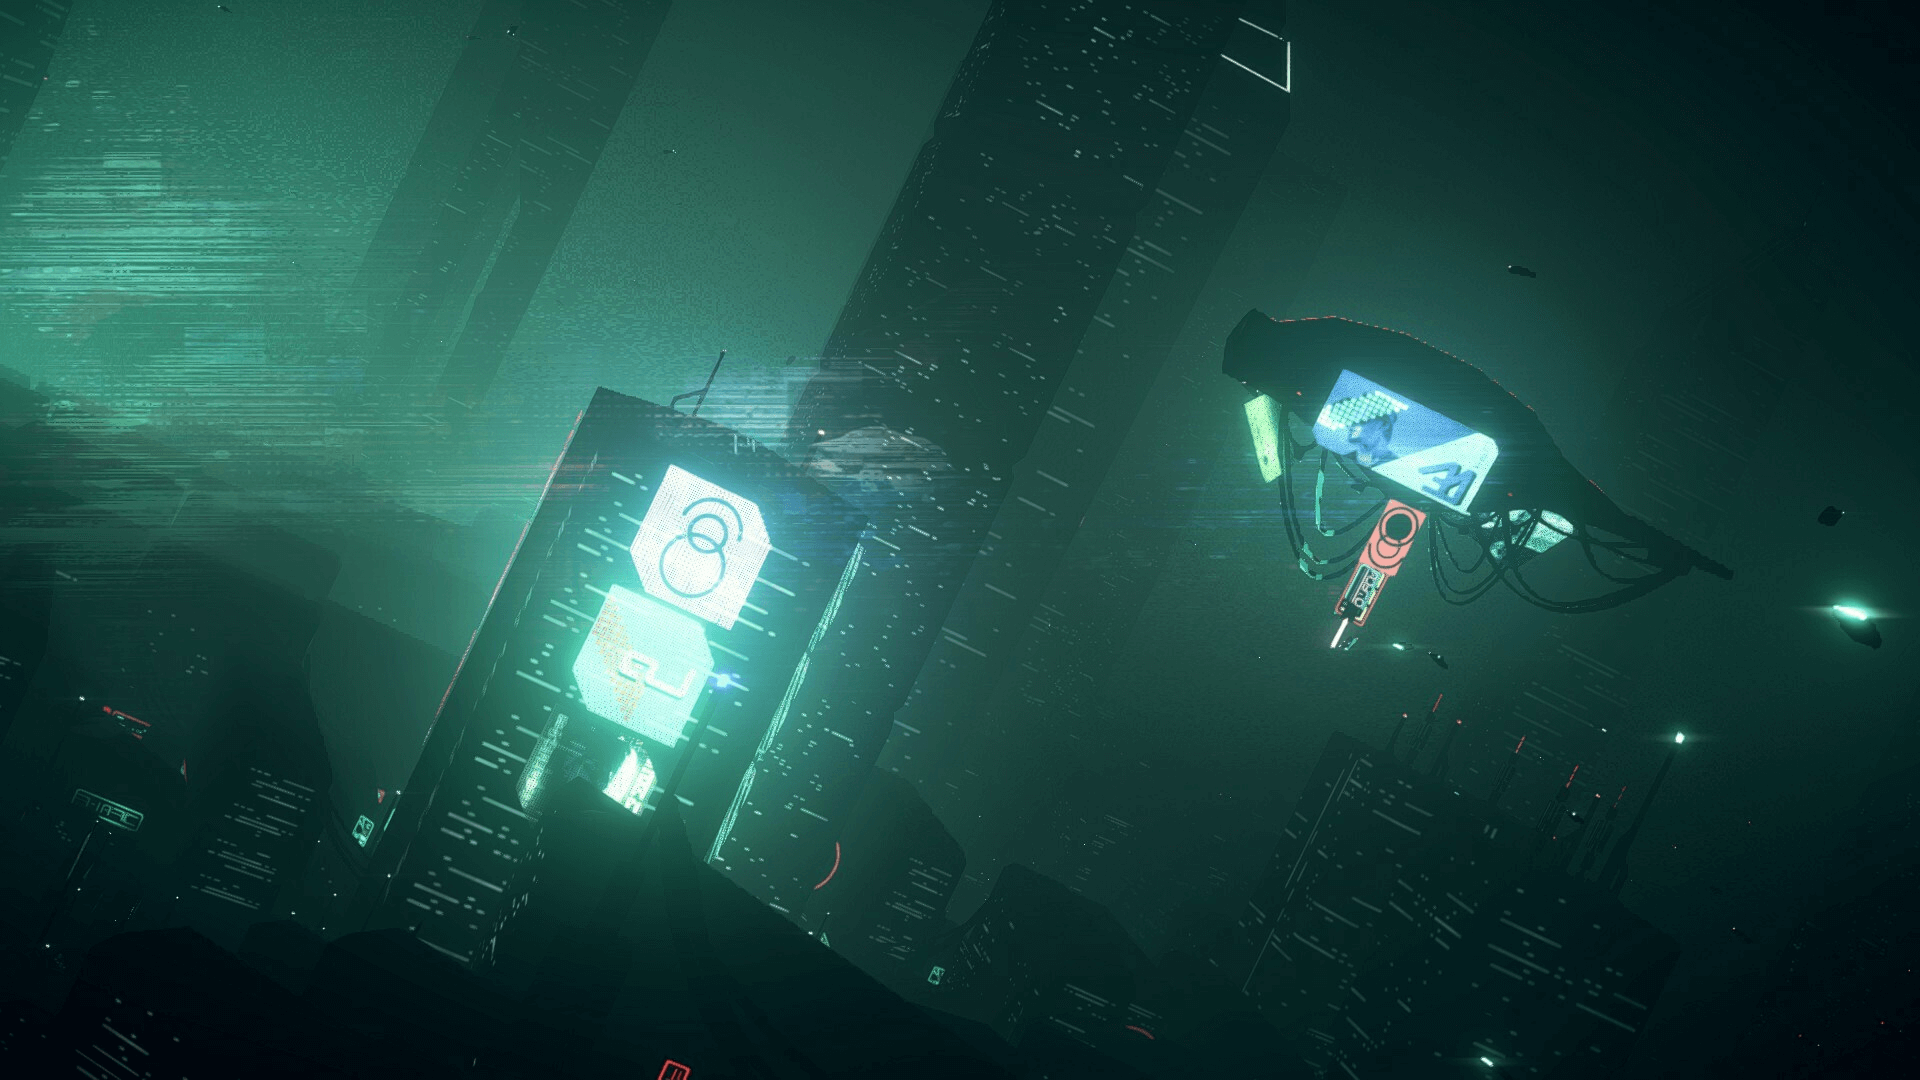 Cyberpunk City-Builder, Dystopika Available Now On Steam